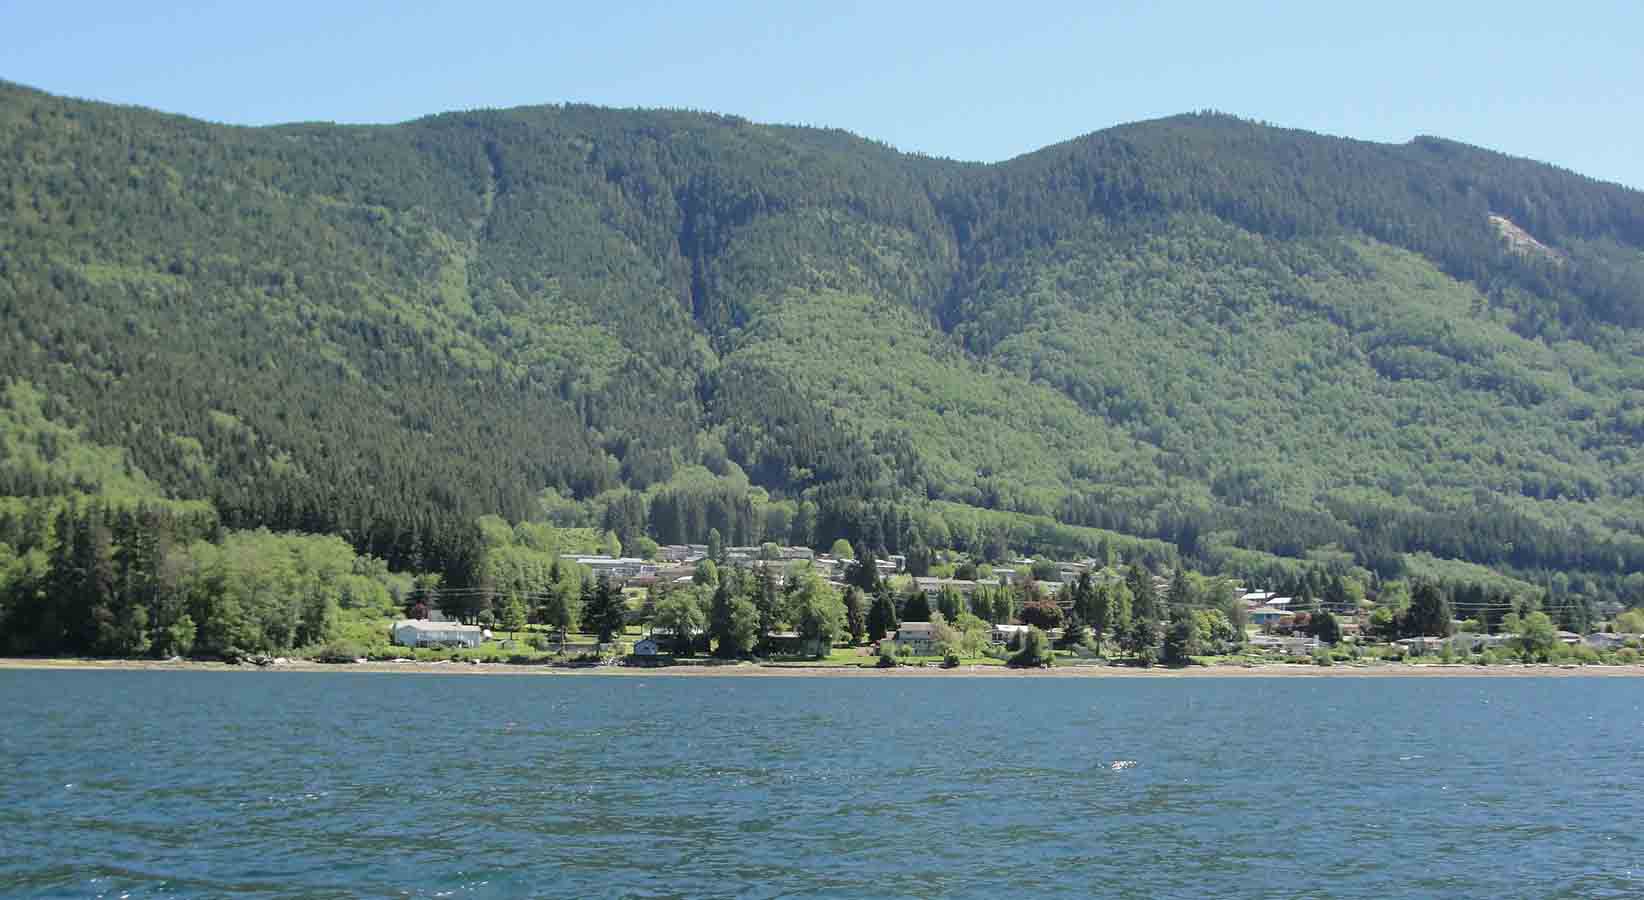 Port Alice from the water